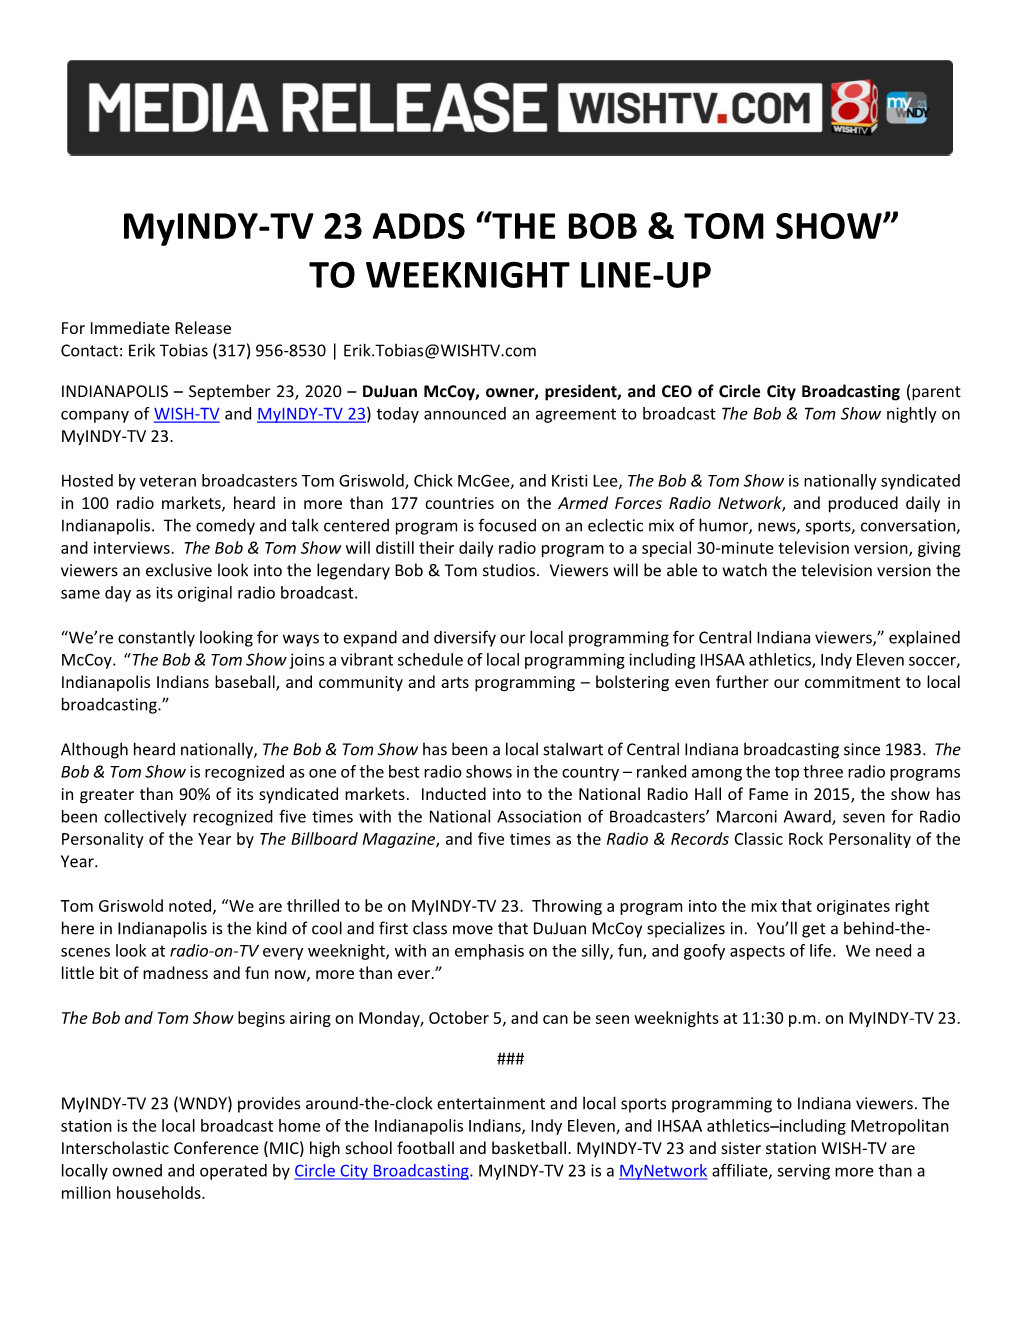 Myindy-TV 23 ADDS “THE BOB & TOM SHOW” to WEEKNIGHT LINE-UP